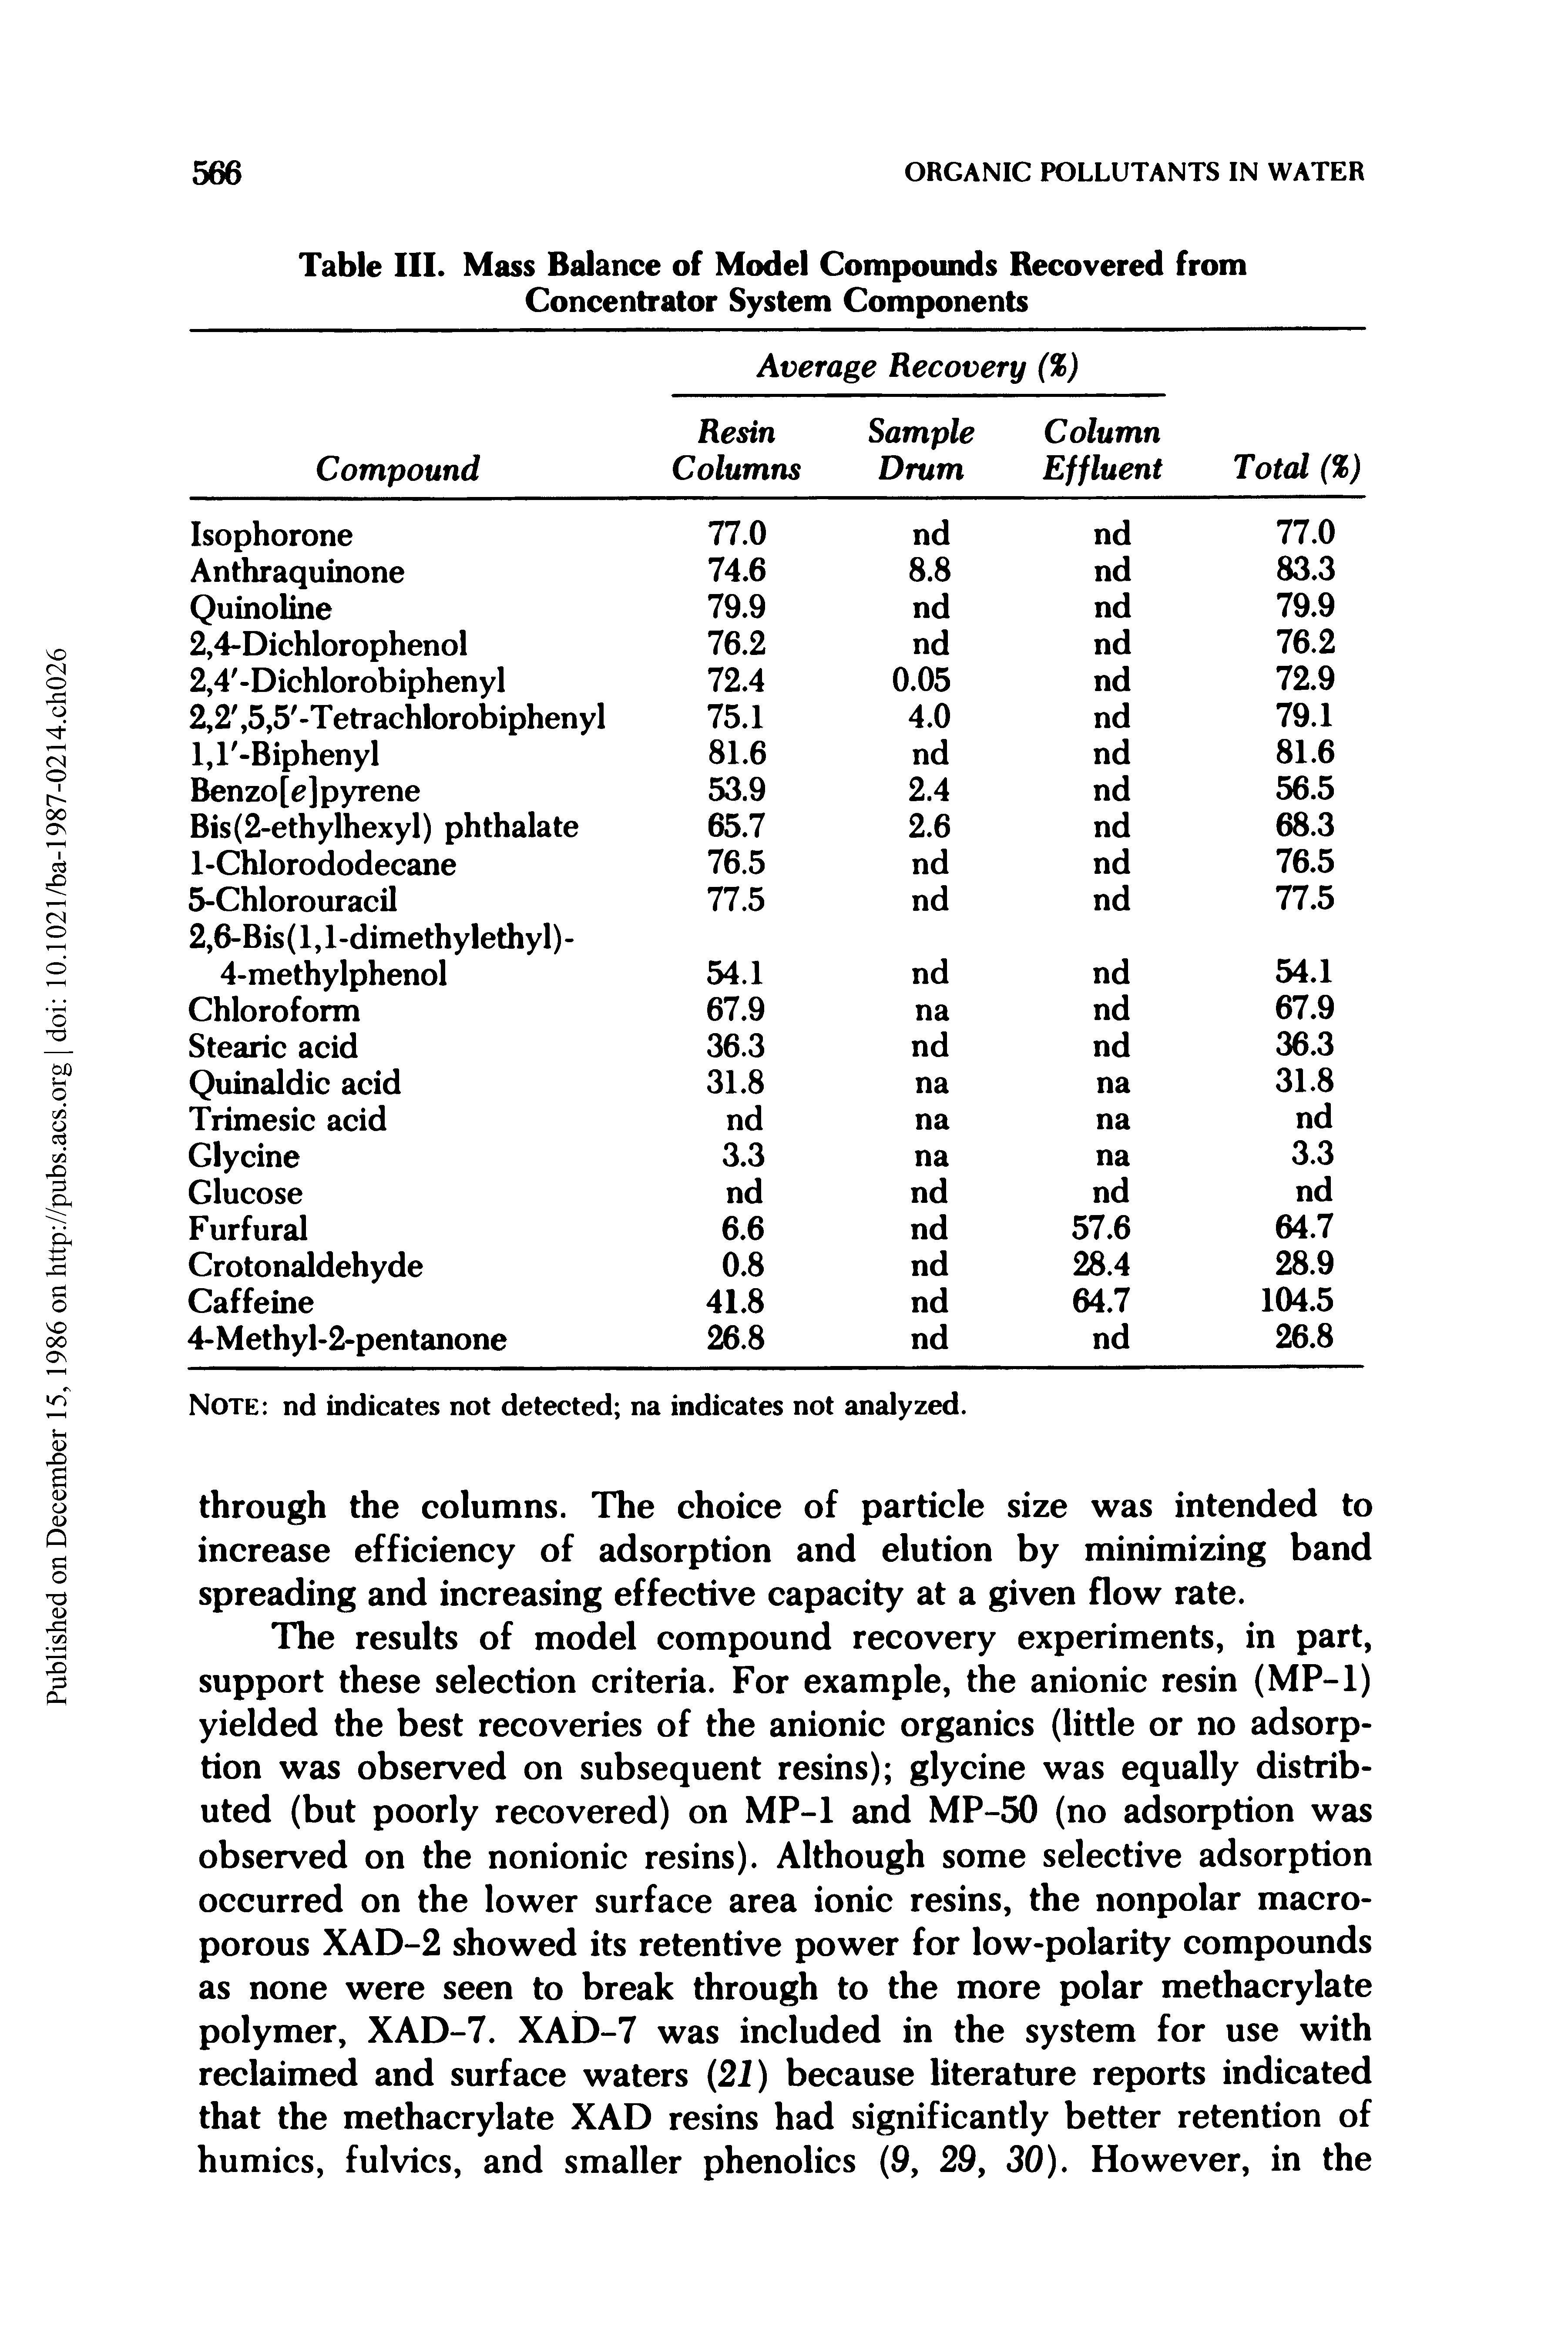 Table III. Mass Balance of Model Compounds Recovered from Concentrator System Components...